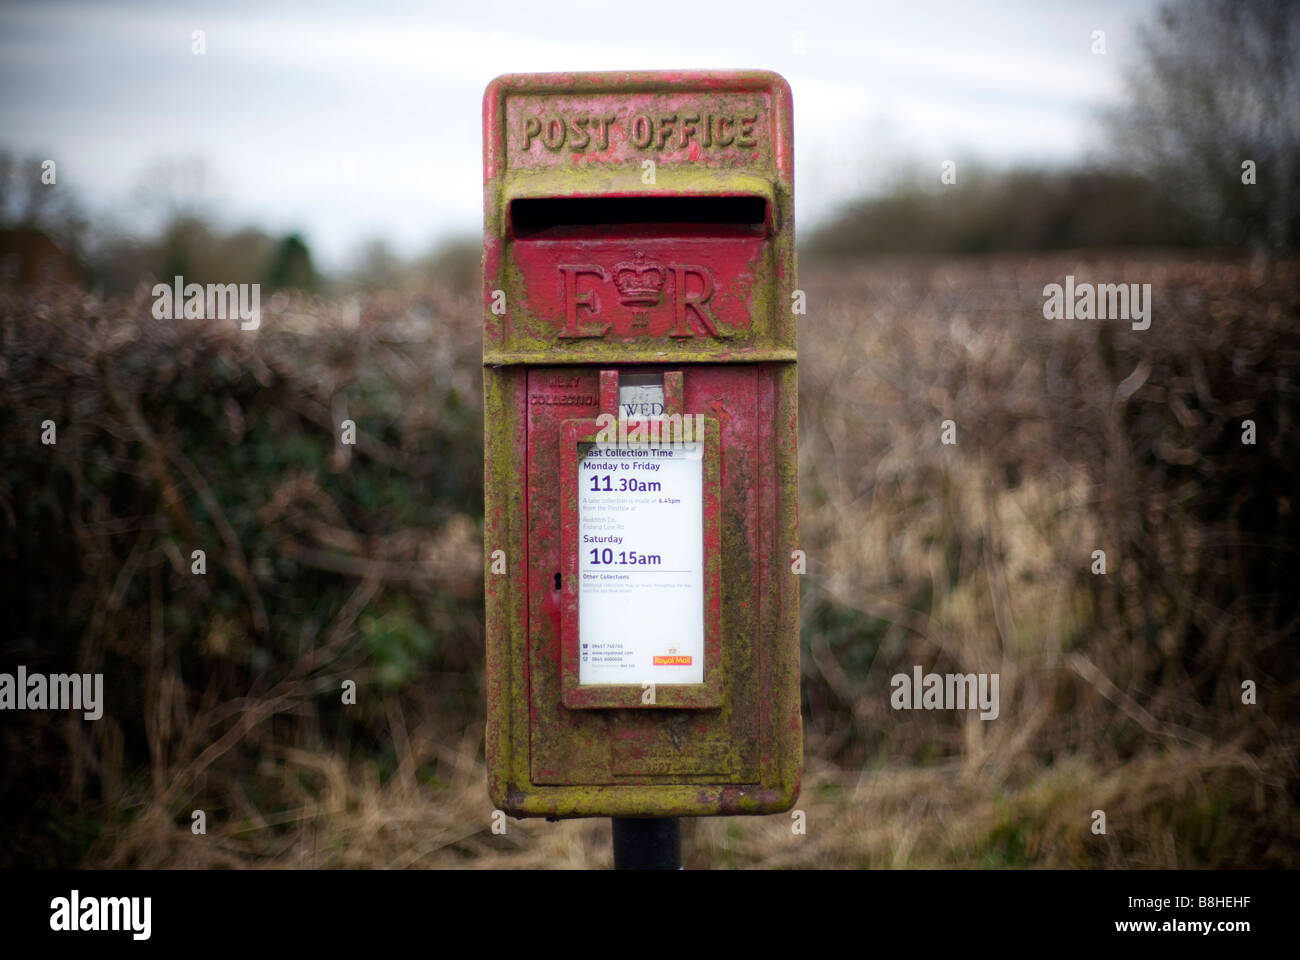 A Royal Mail post box in a rural setting Worcestershire England UK Stock Photo